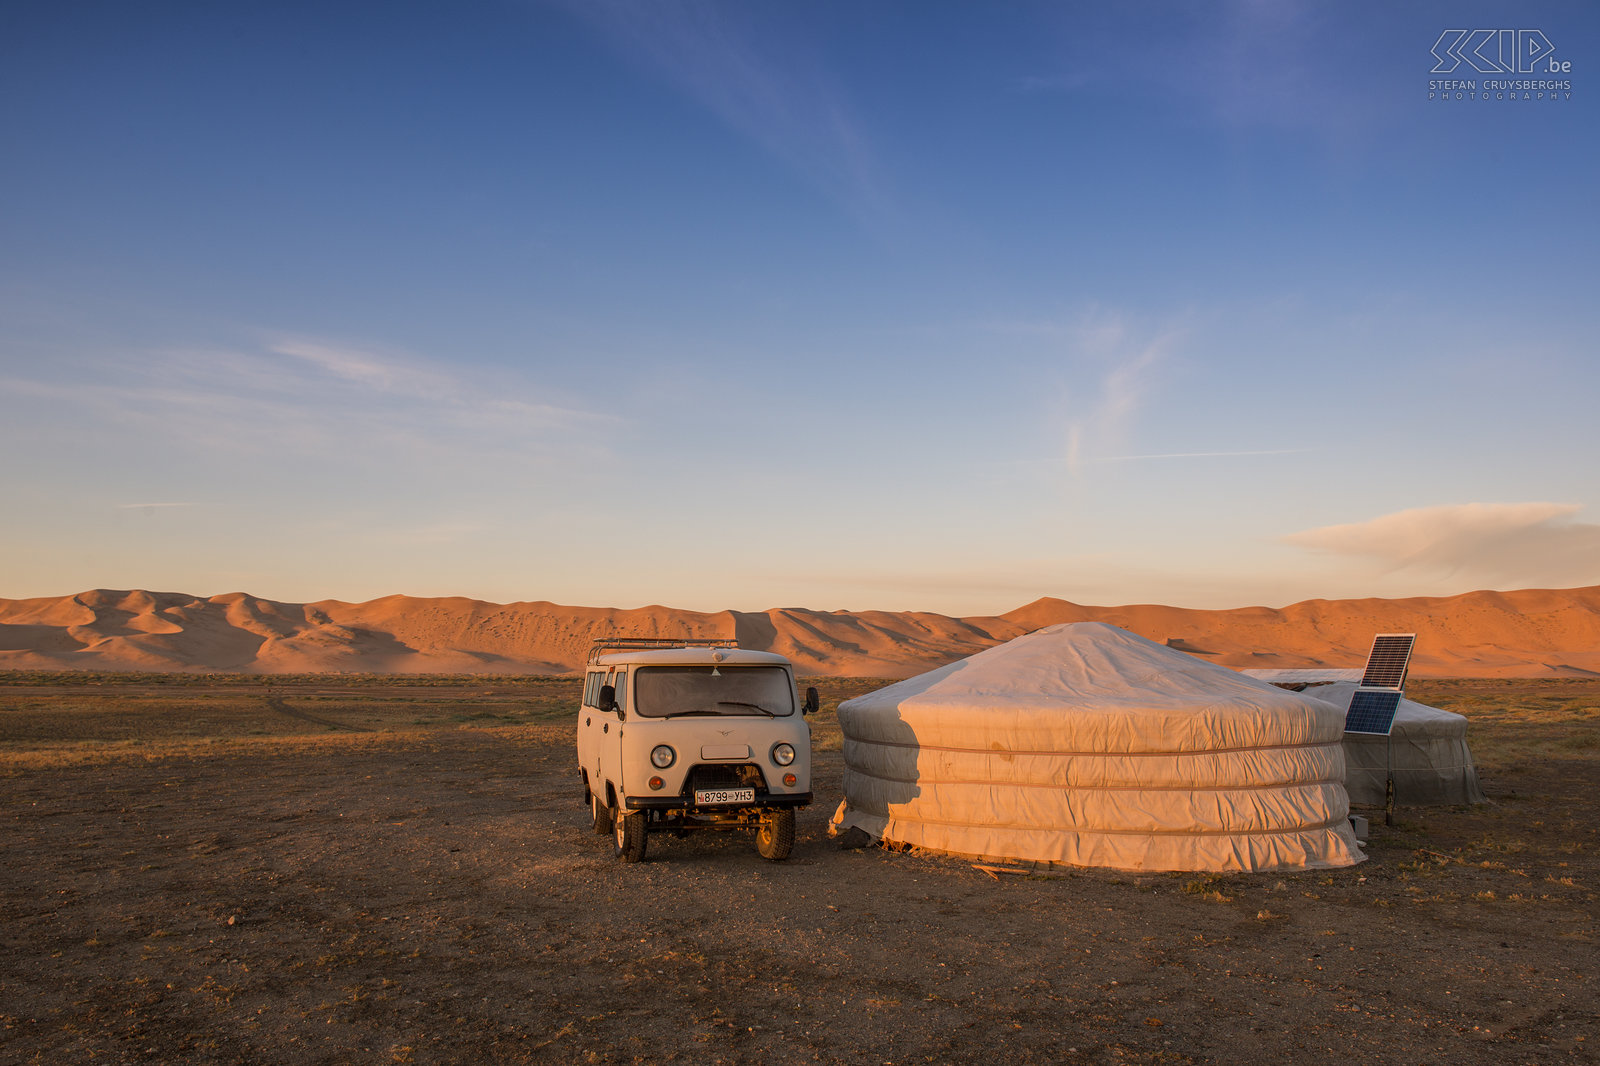 Gobi - Khongoryn Els - Ger and minivan Sunrise at the gers of the nomad family where we were staying near the Khongoryn Els sand dunes and our Russian 4x4 minivan. A ger (yurt in Russian) is the typical portable bent dwelling of Mongolian nomads. Nowadays, they also use solar cells for lighting, TV and DVD player, charging smartphones, ... Stefan Cruysberghs